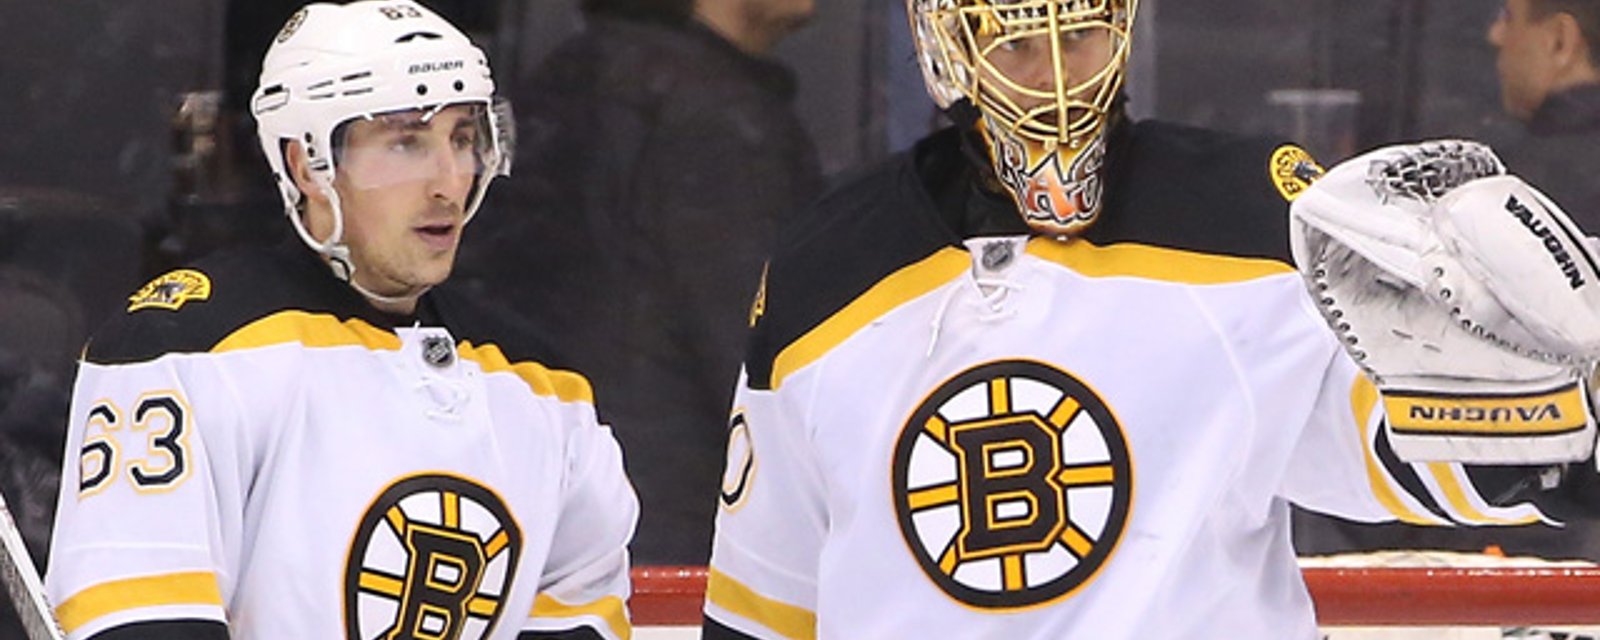 Tension in Bruins’ dressing room has Marchand and Rask arguing 